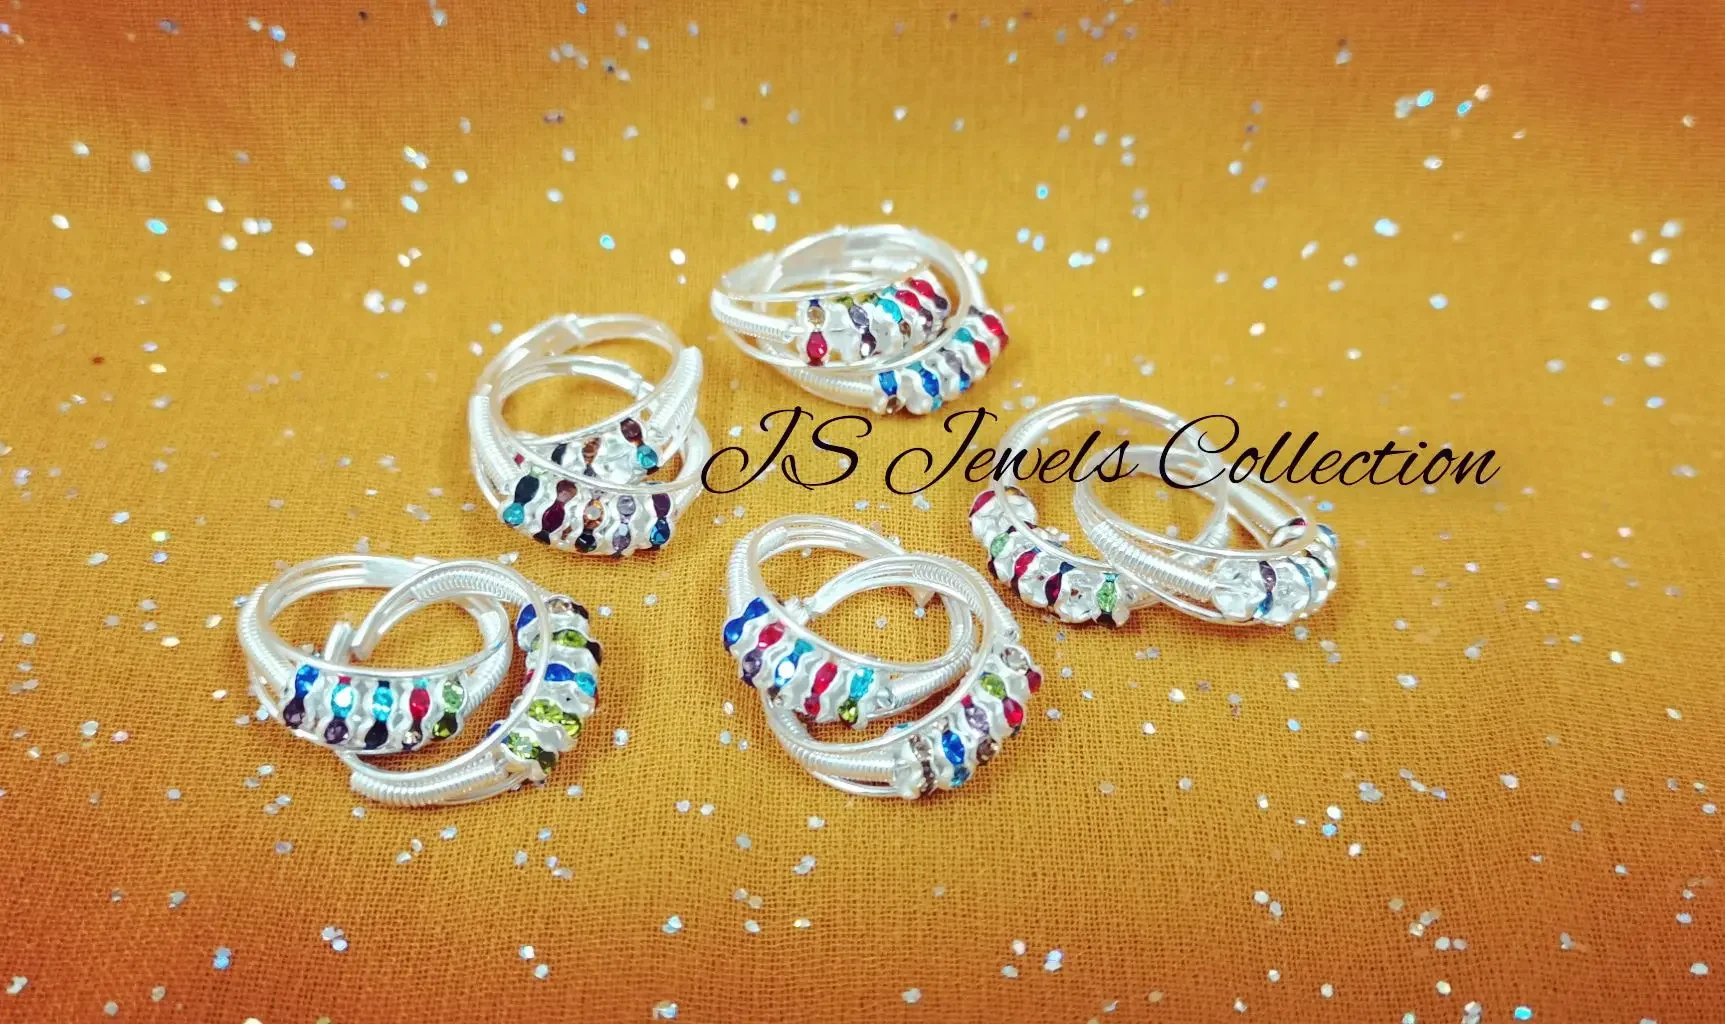 Silver Tone Fancy Toe Ring/Metti with 5 Layers Colourful Stones💕